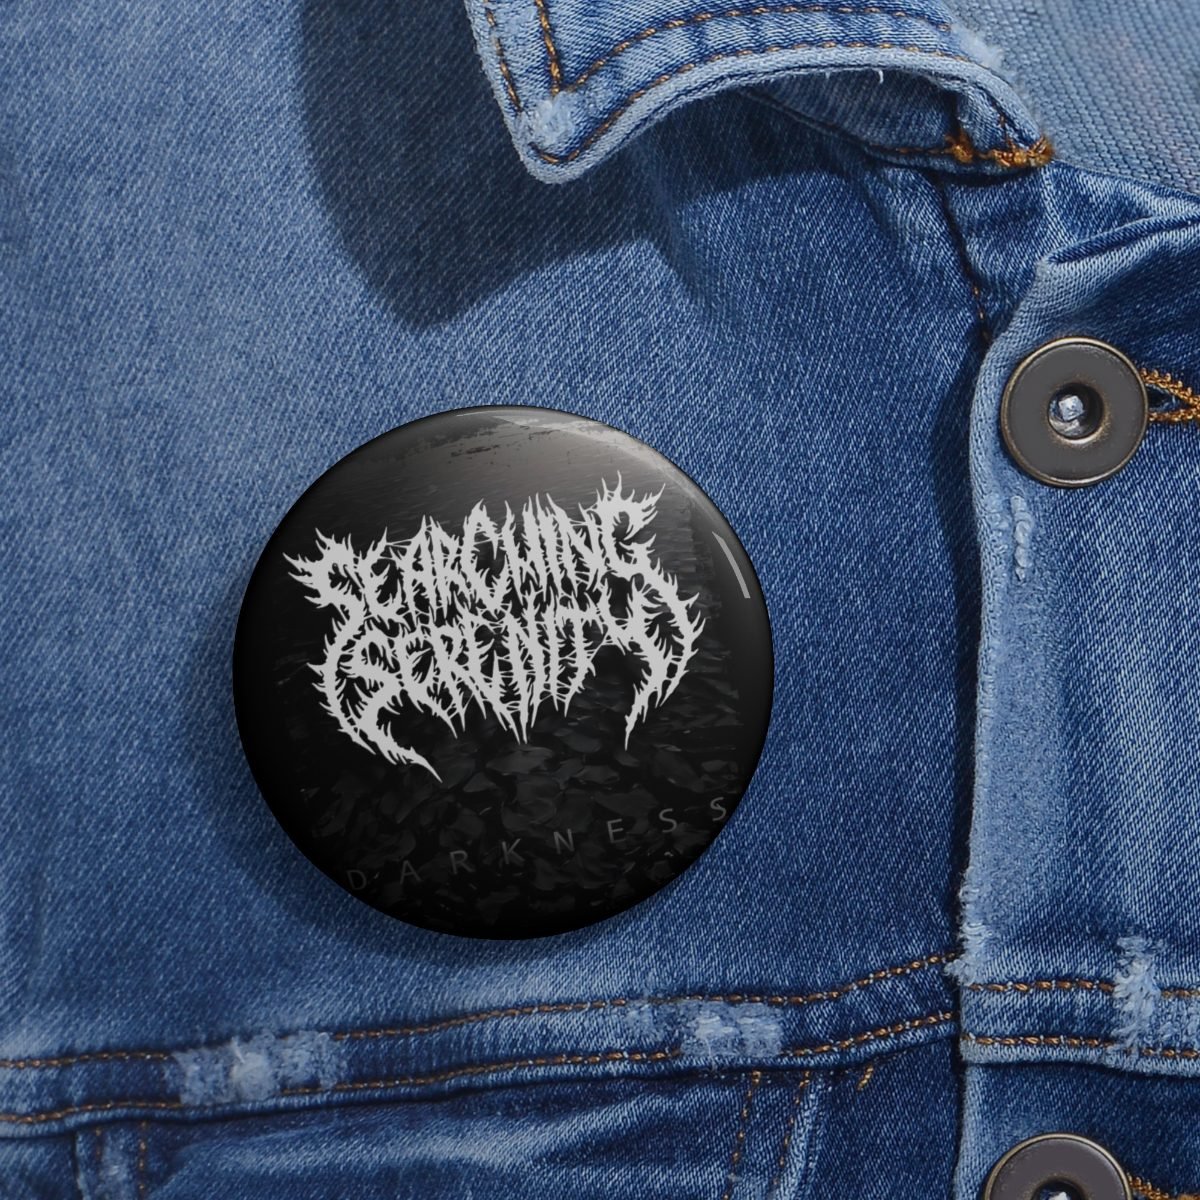 Searching Serenity – Darkness Pin Buttons